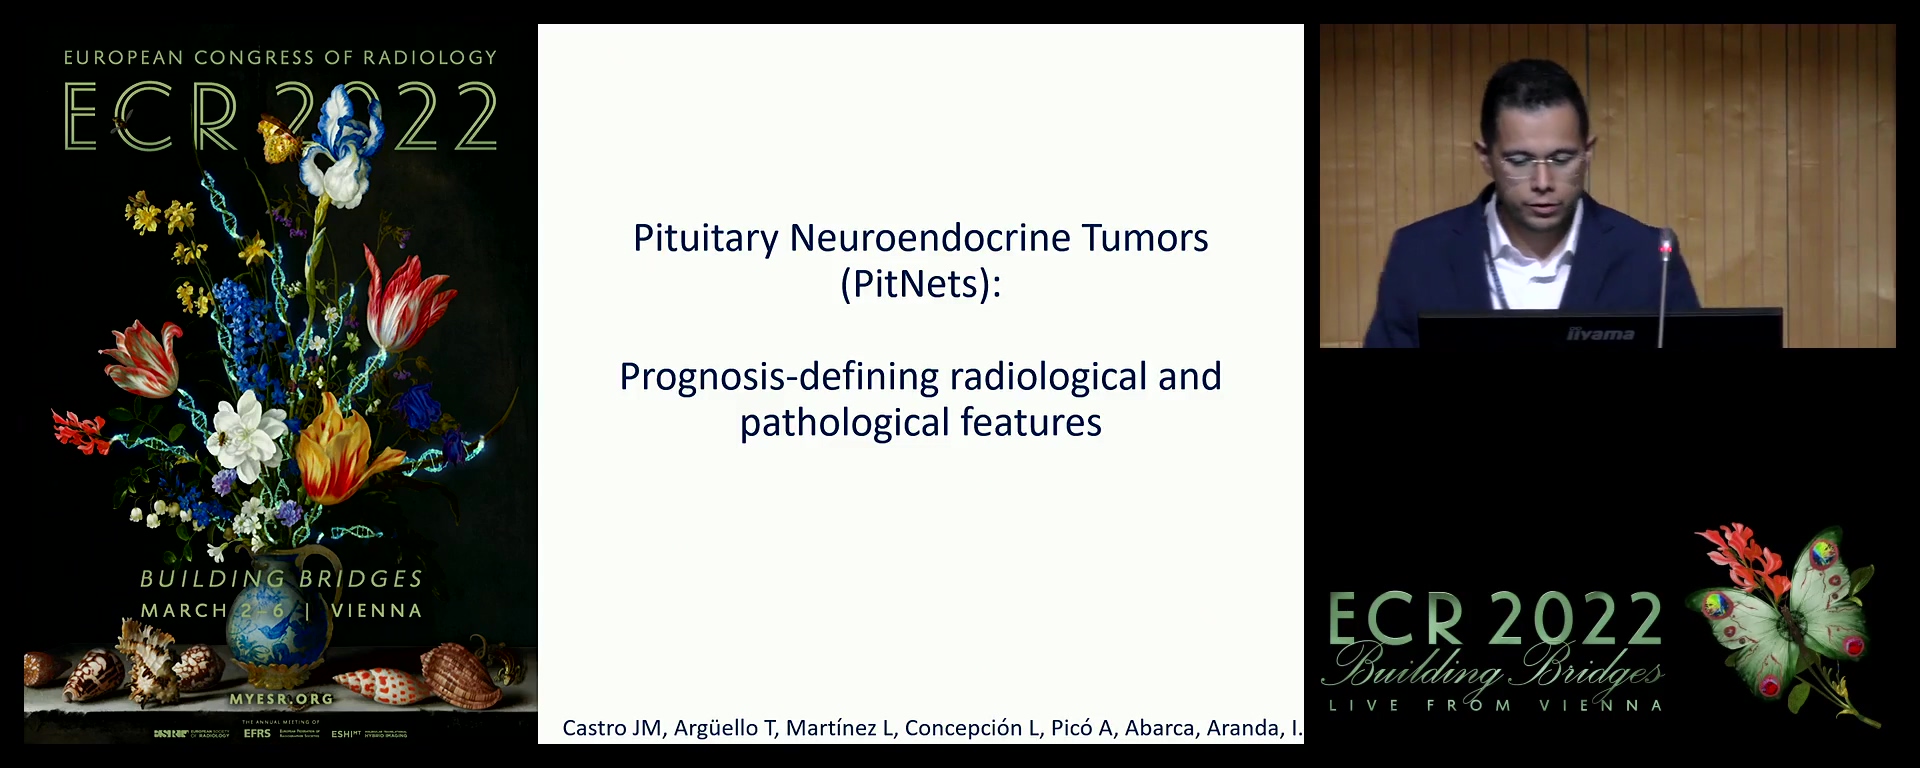 Radiological and pathological predictors of post-surgical evolution of pituitary neuroendocrine tumours. A retrospective analysis of 125 patients